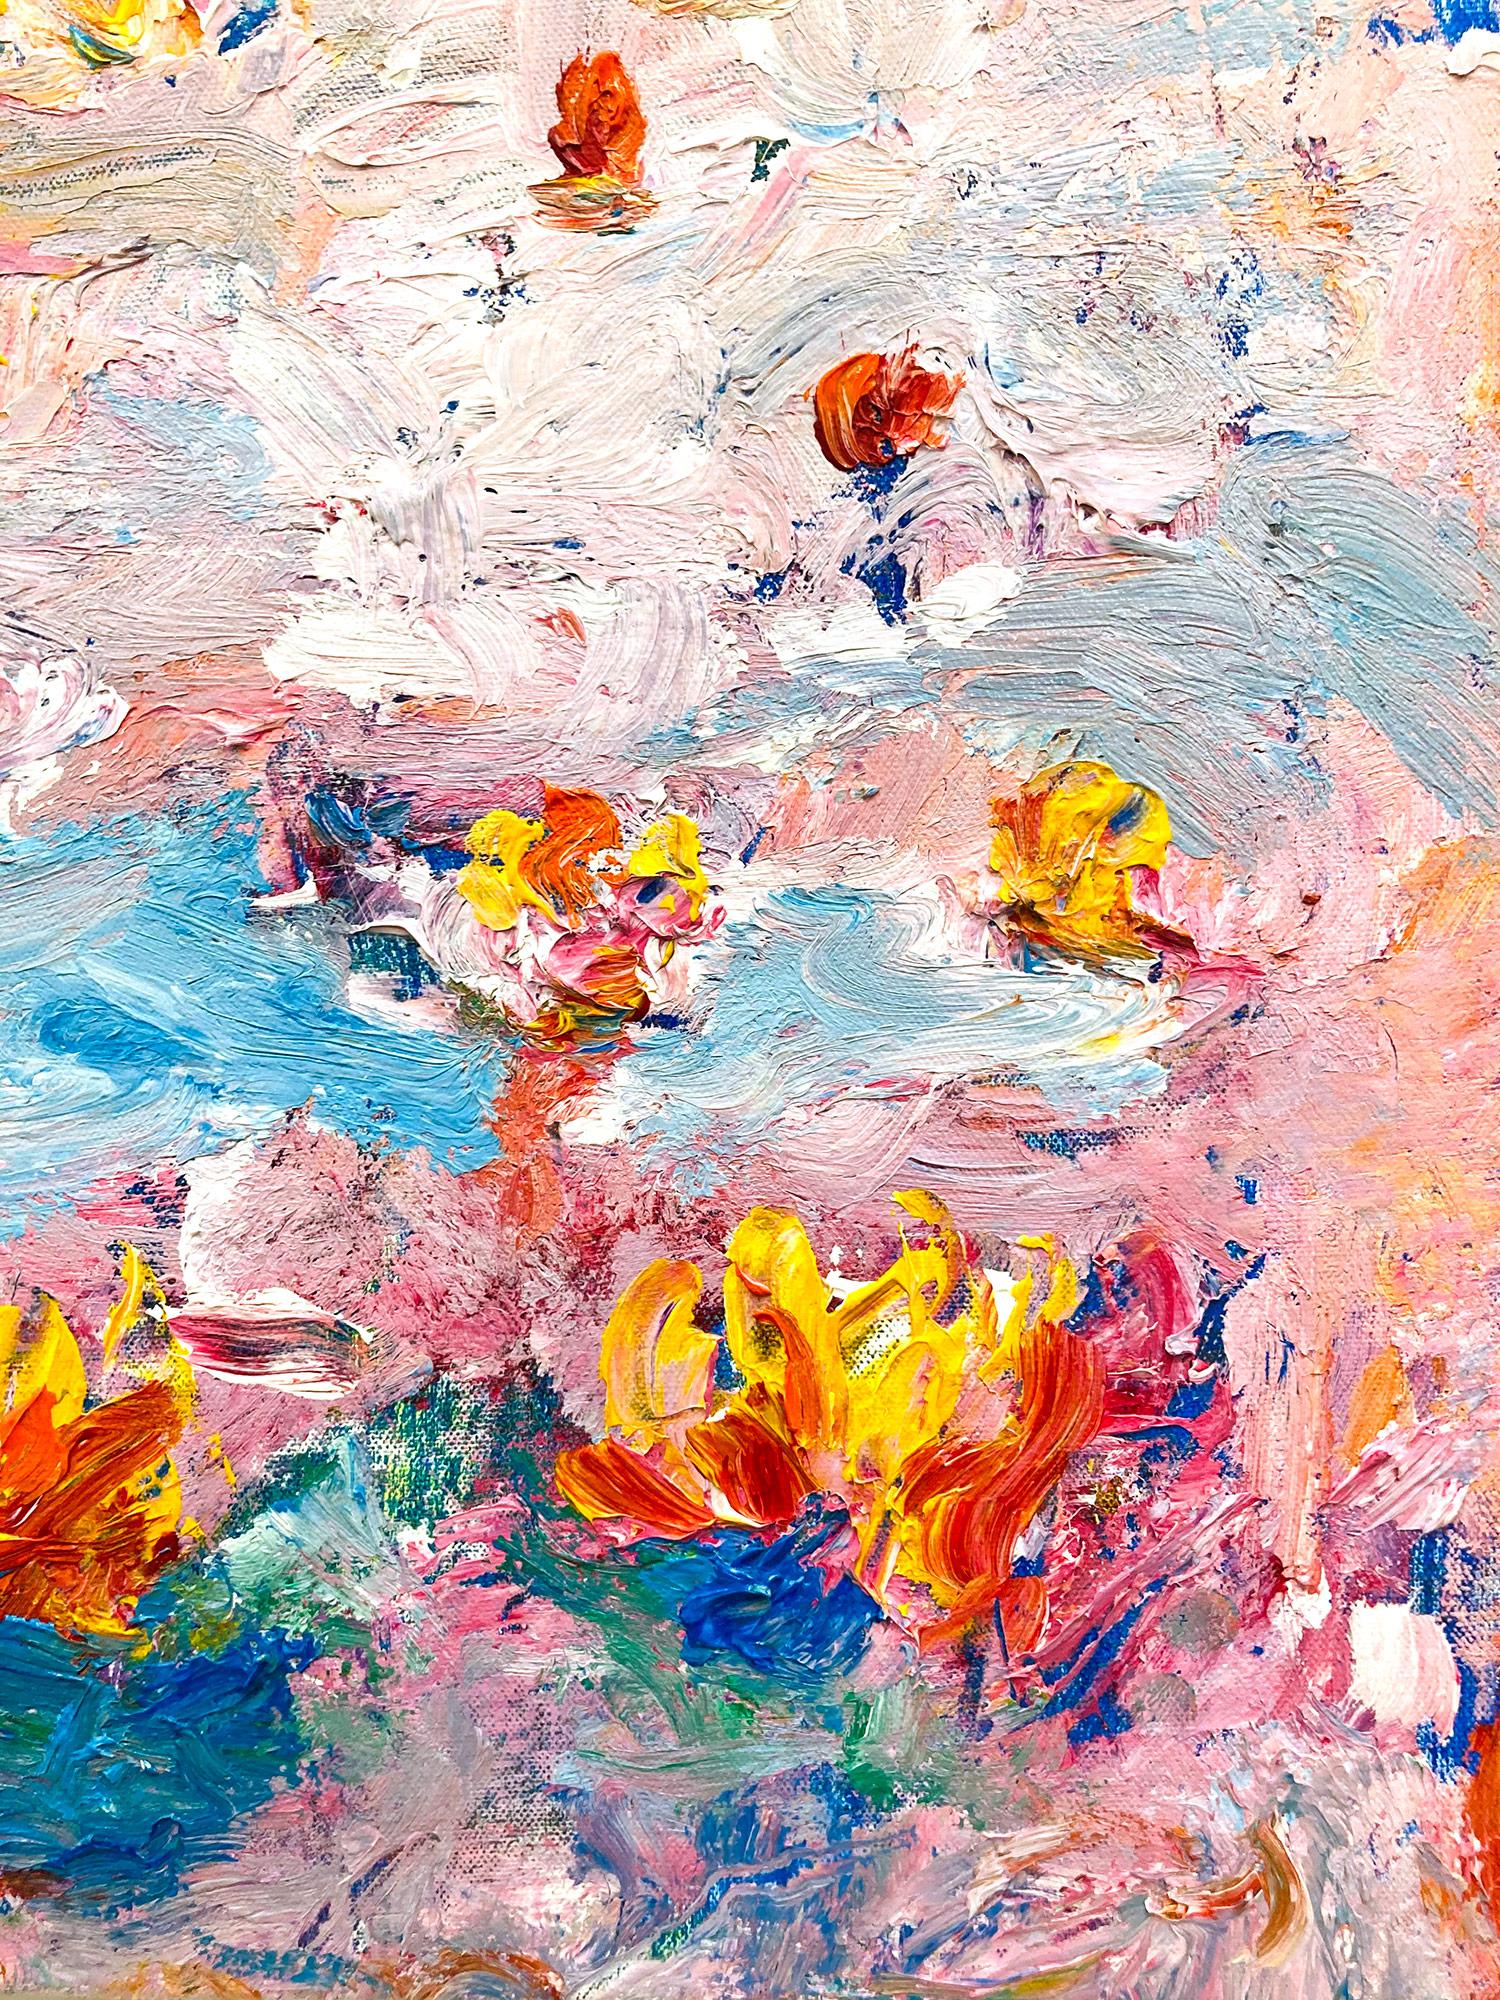 An abstract expressionist acrylic painting on canvas with wonderful color combinations of whites, pinks, yellow and effortless lines and shapes. Inspired by Claude Monet's Lilly Pads, this piece is the artists interpretation layered with paint and